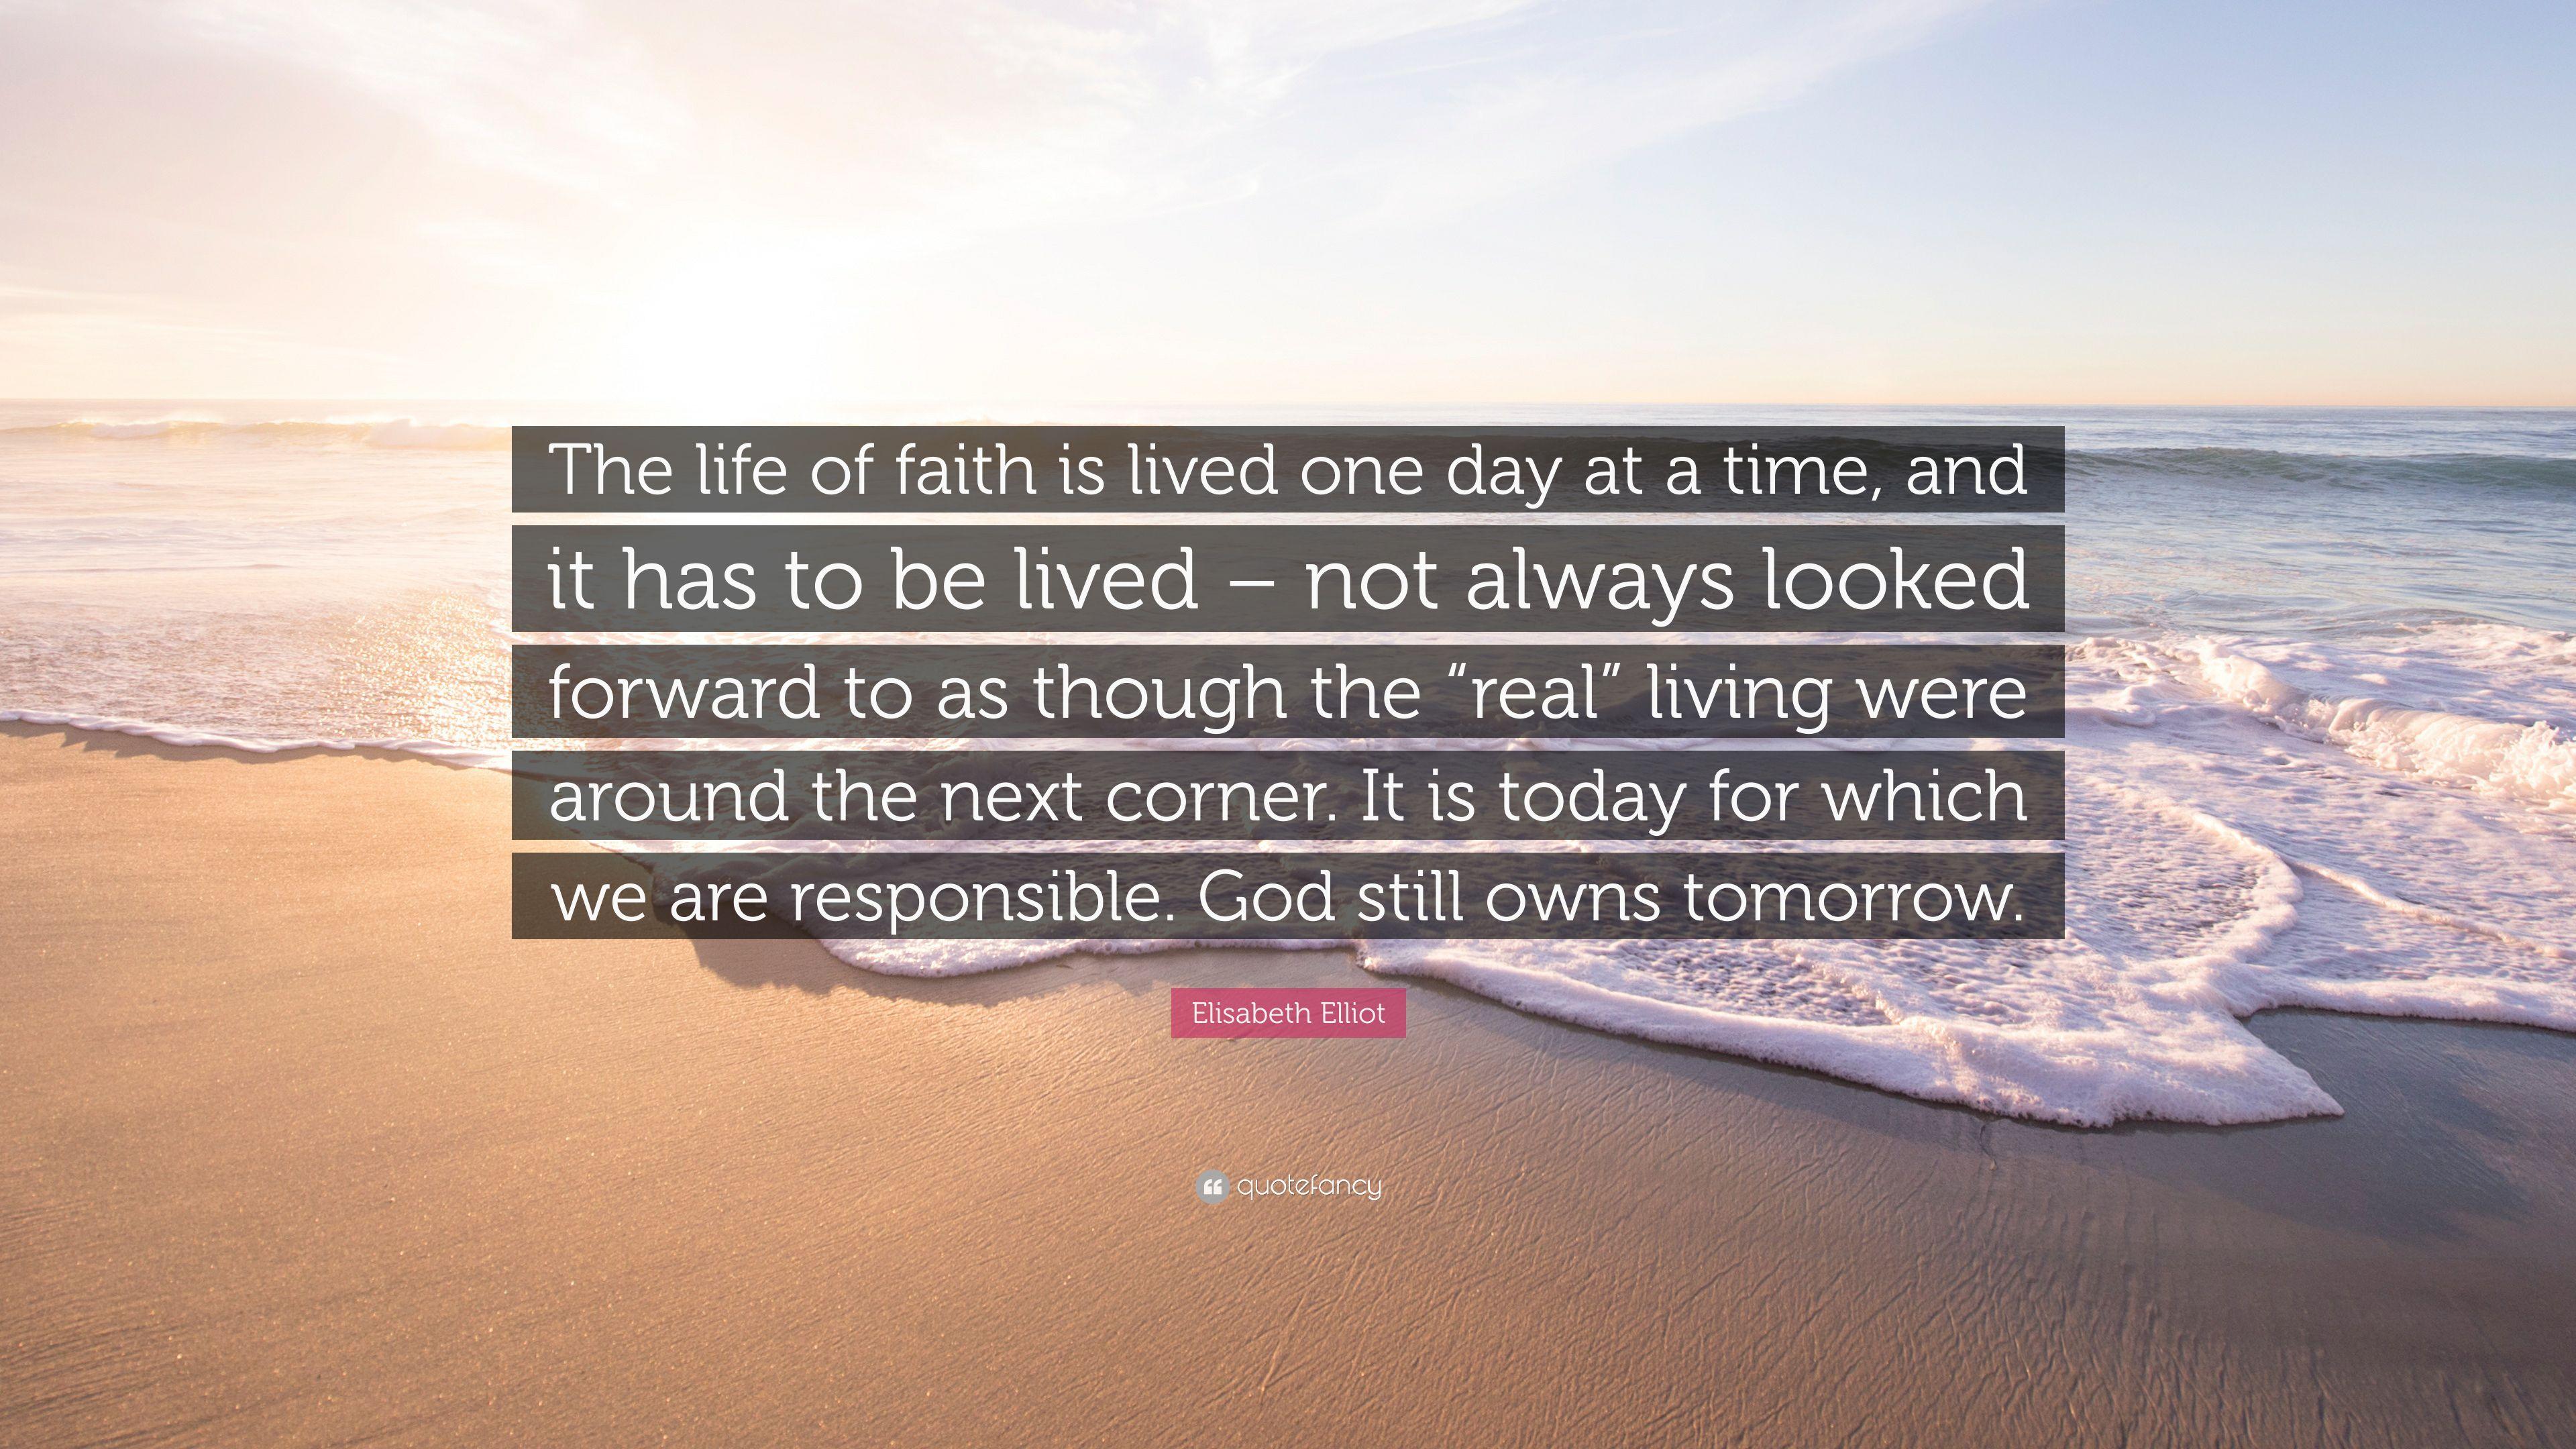 Elisabeth Elliot Quote: “The life of faith is lived one day at a